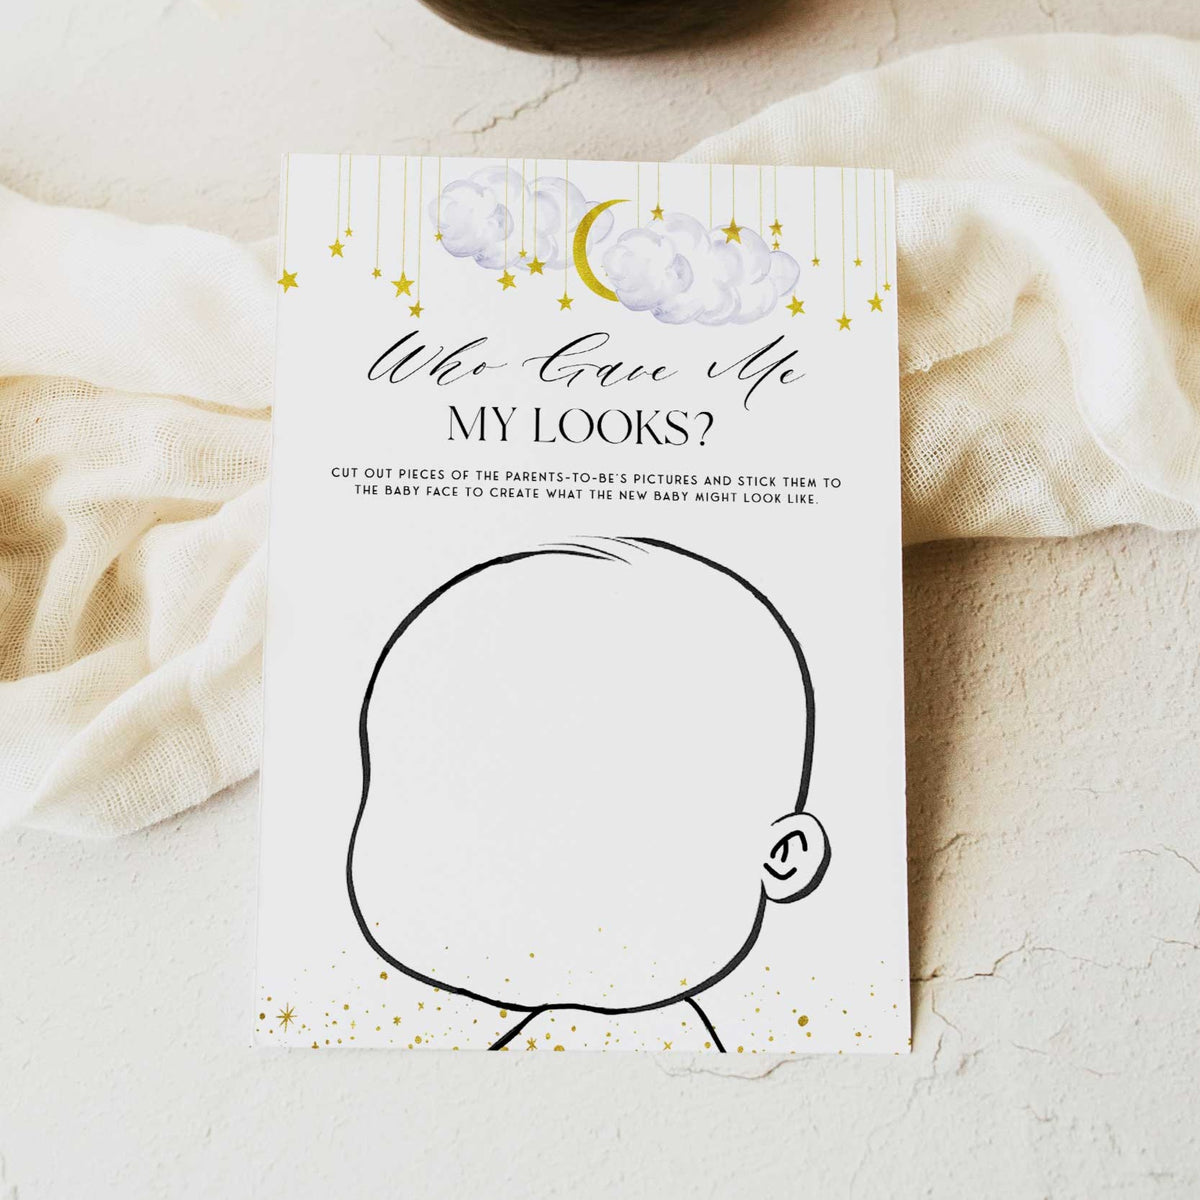 Fully editable and printable baby shower who gave me my looks game with a little star design. Perfect for a Twinkle Little Star baby shower themed party